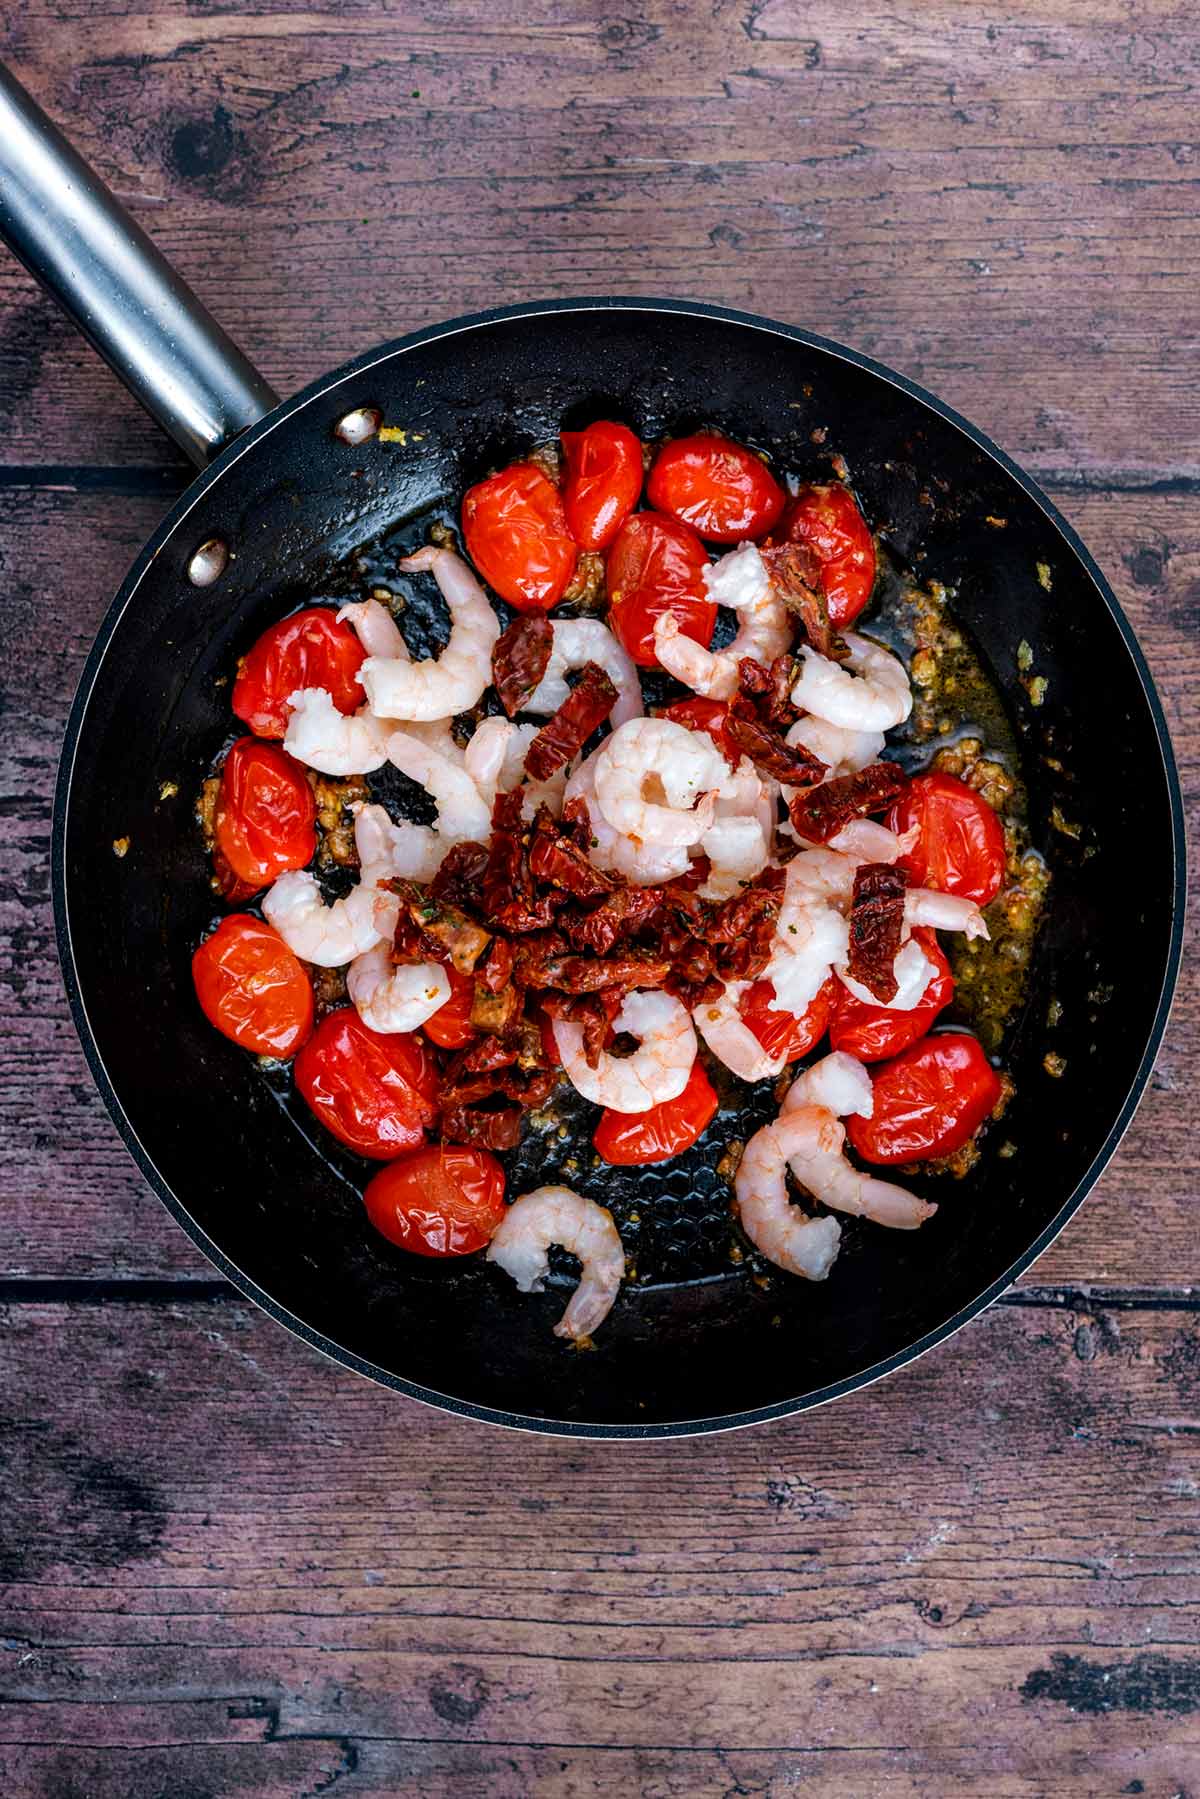 Prawns and sun-dried tomatoes added to the frying pan.